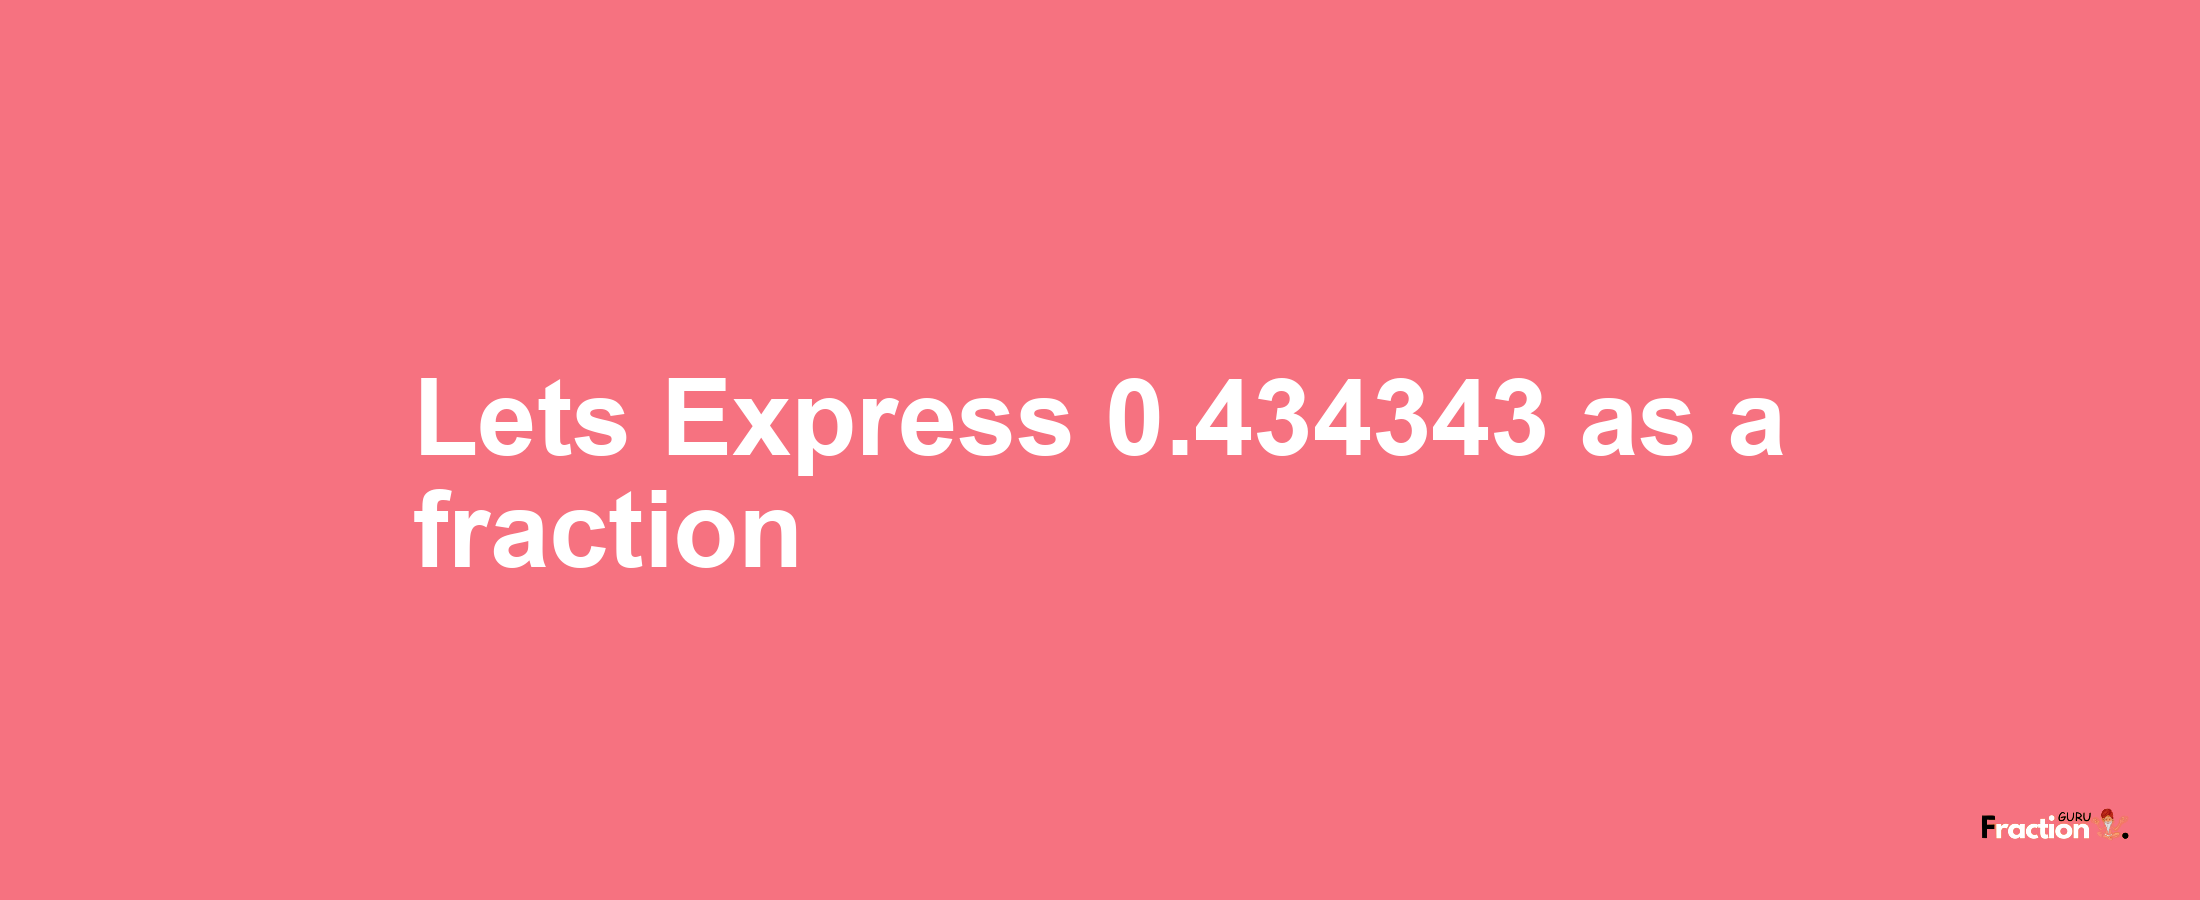 Lets Express 0.434343 as afraction